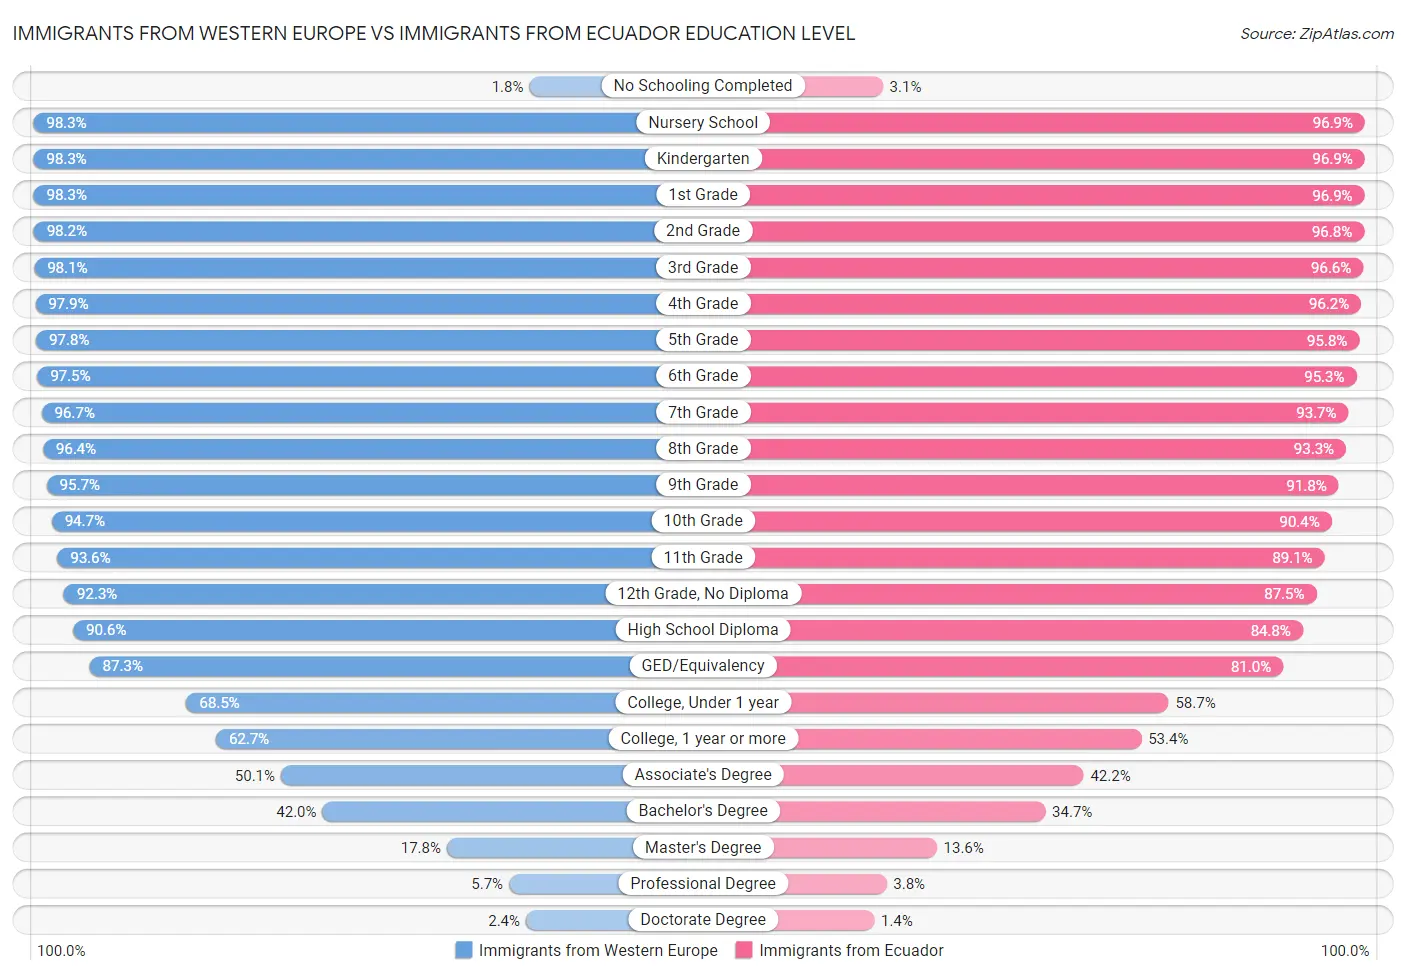 Immigrants from Western Europe vs Immigrants from Ecuador Education Level